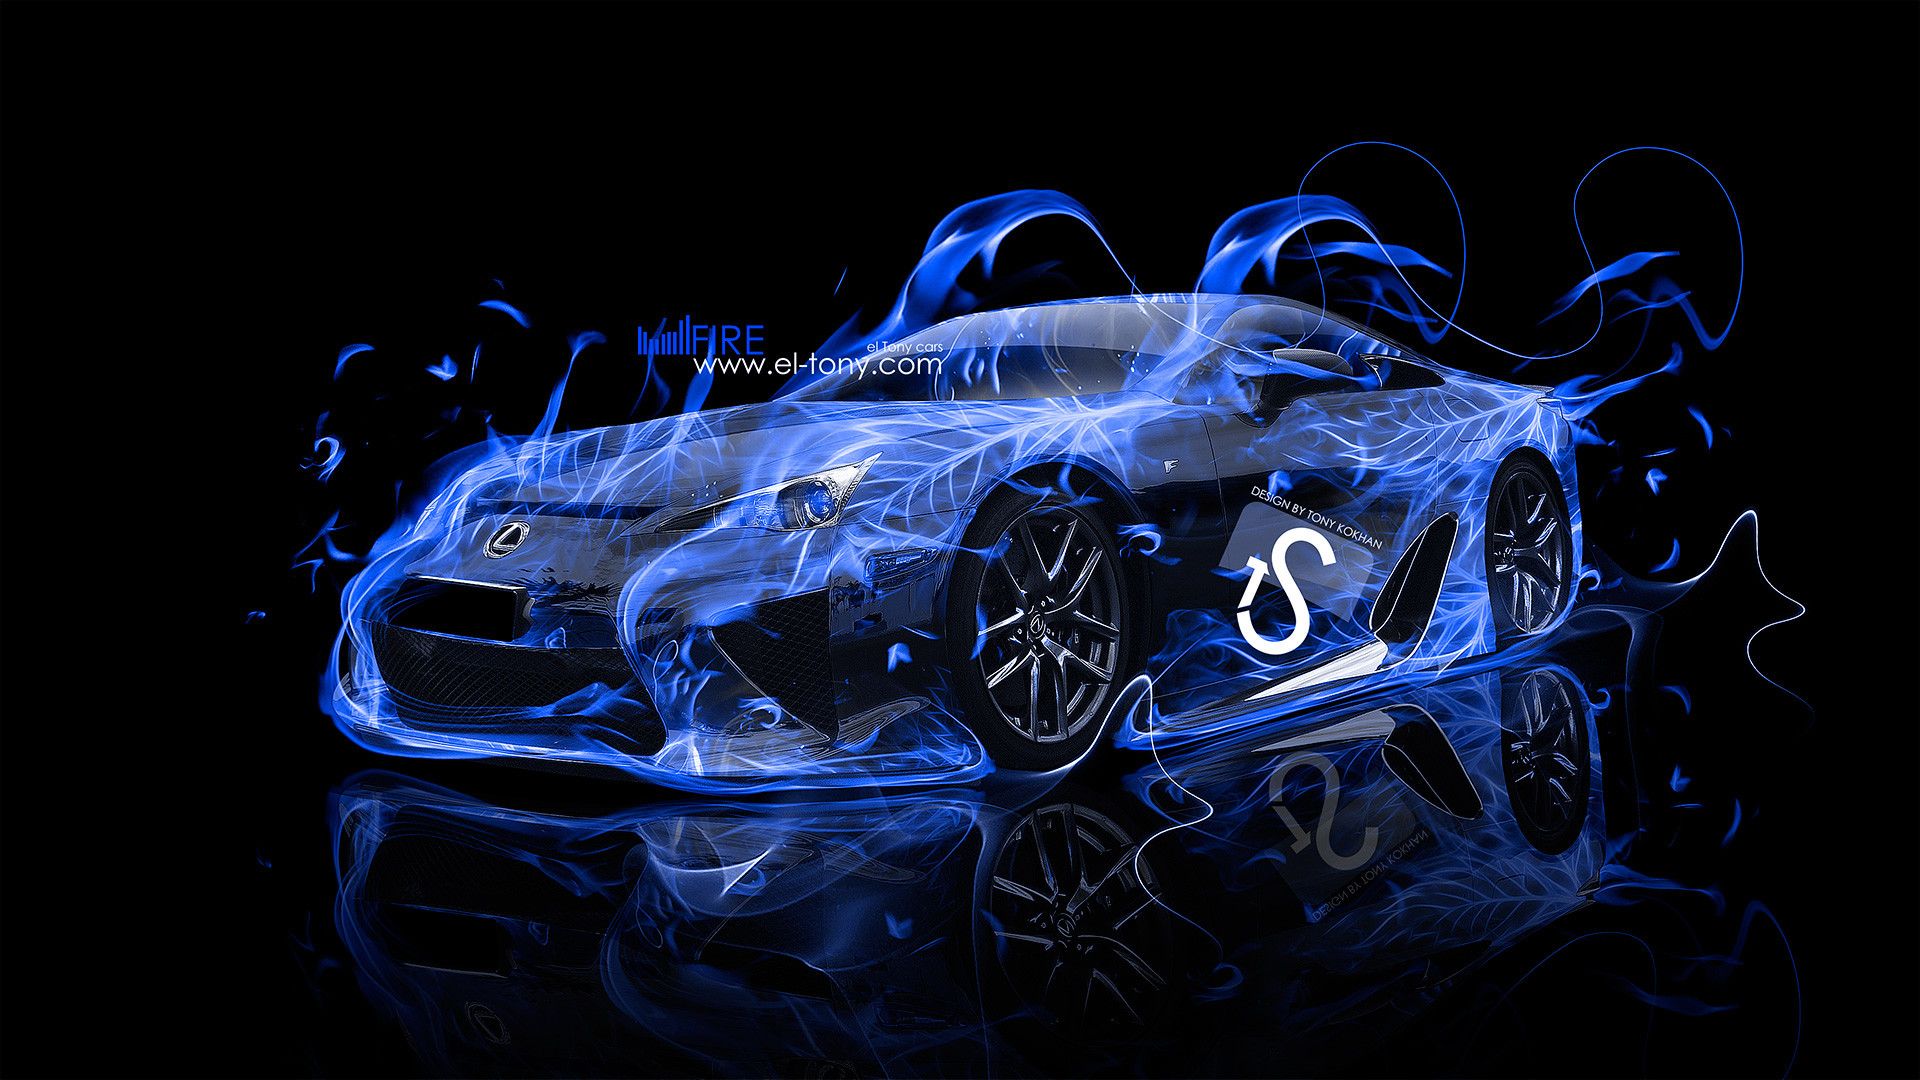 Car With Flames Wallpapers